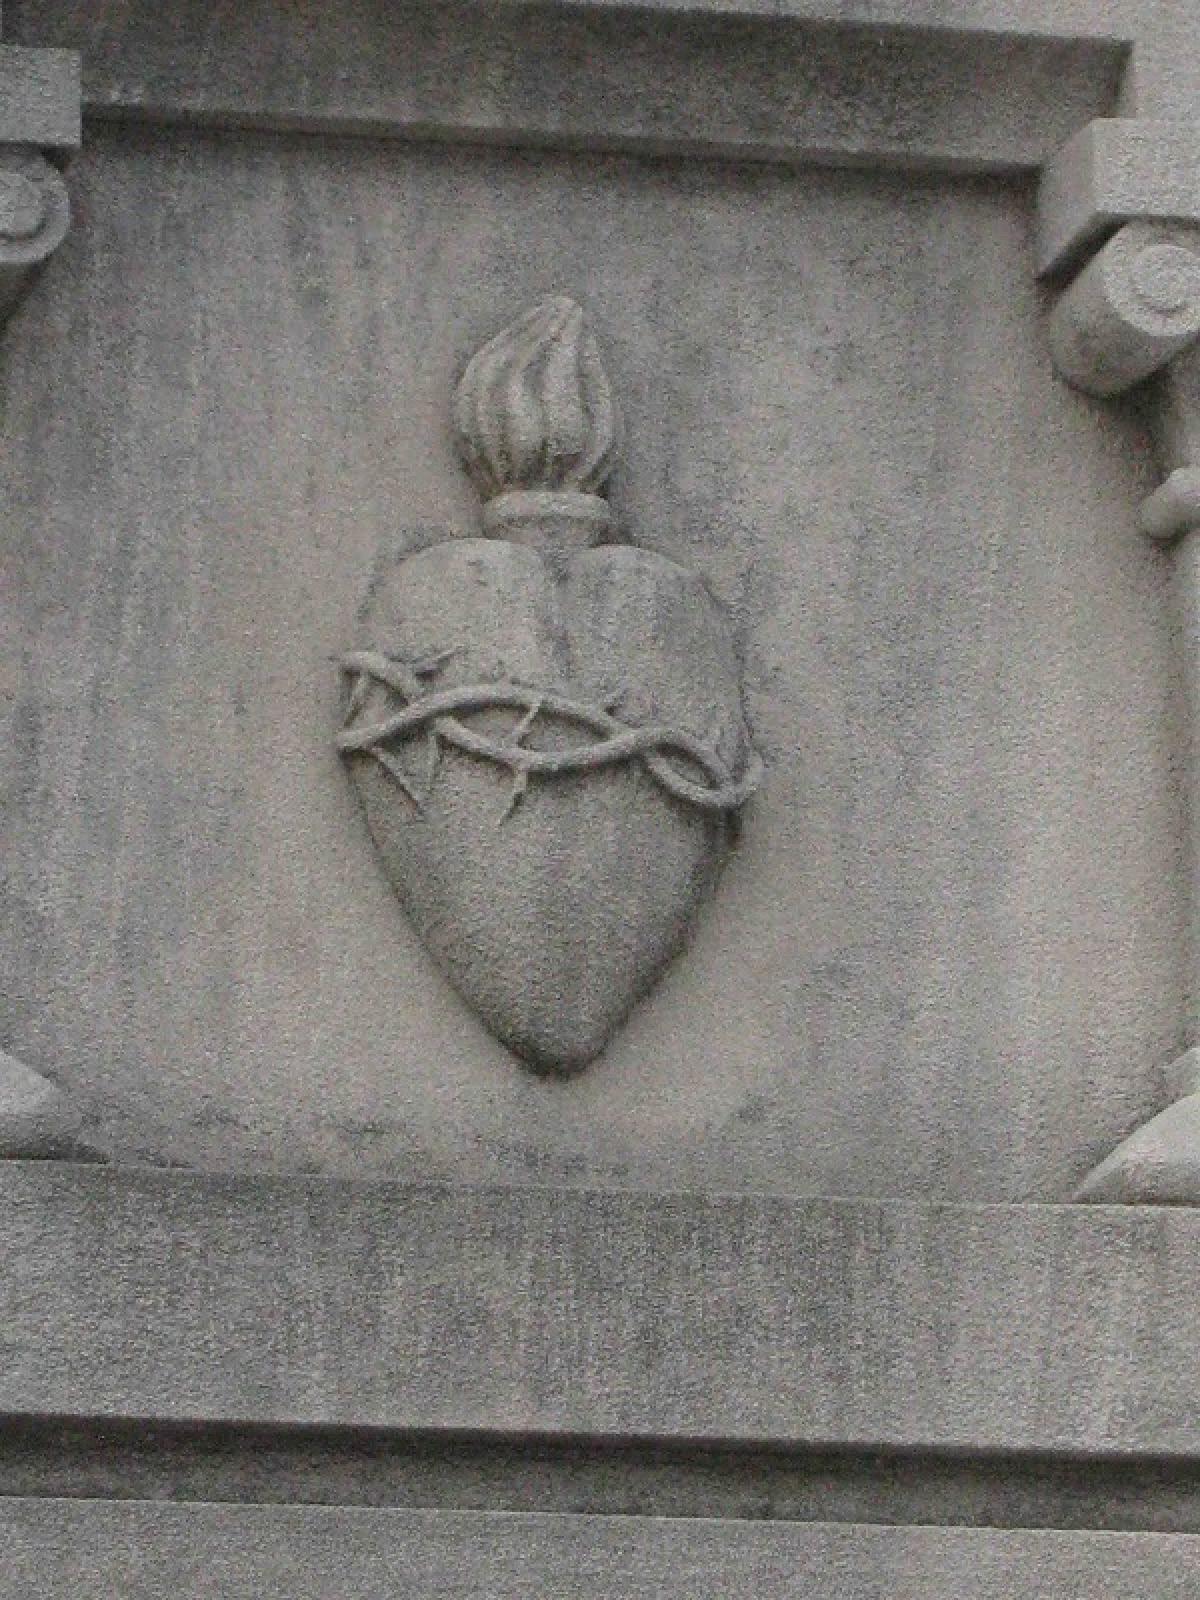 OK, Grove, Headstone Symbols and Meanings, Heart and Flame (Sacred Heart of Jesus Christ)